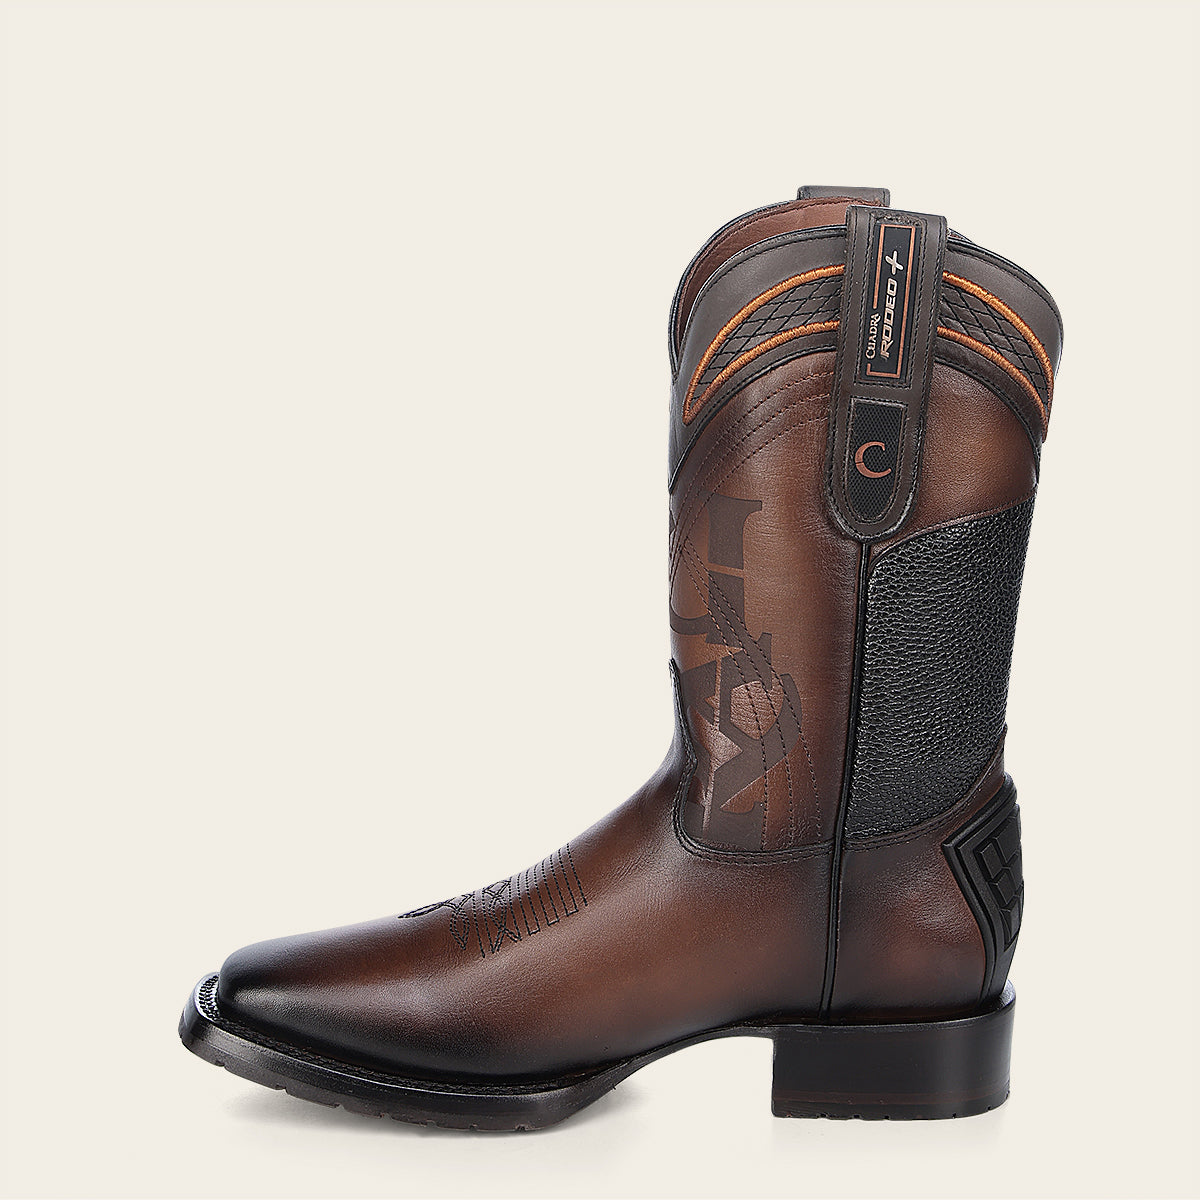 Honey brown hand-painted engraved decoration leather boots